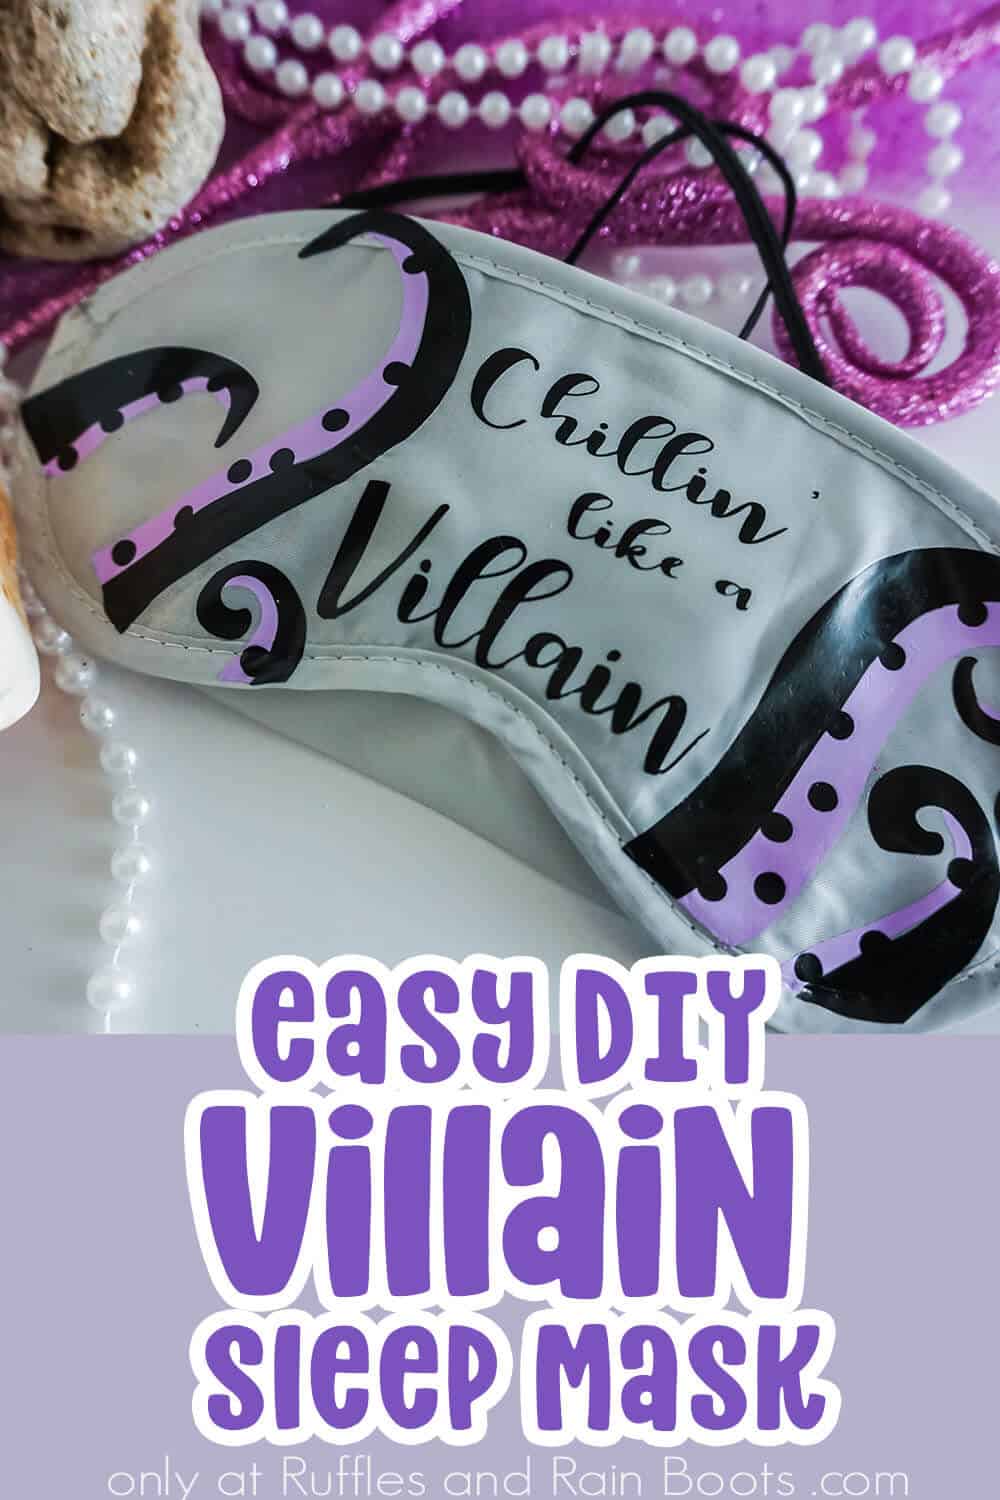 closeup of an easy disney cruise fish extender gift idea with text which reads easy diy villain sleep mask